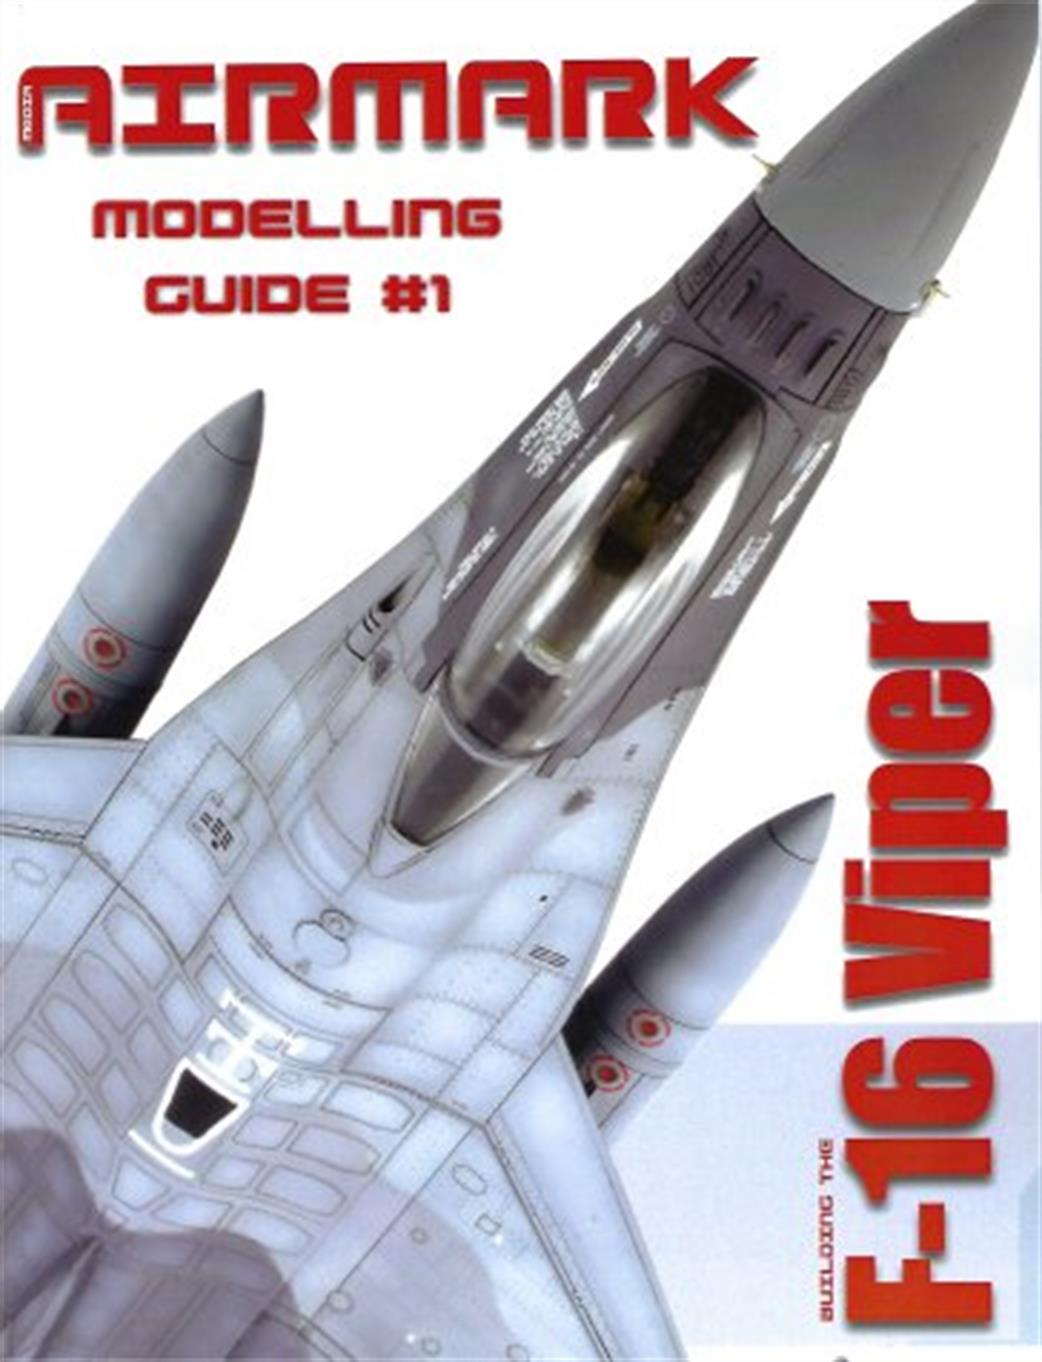 AM1 F-16 Viper Modelling Guide 1 By Airmark Media